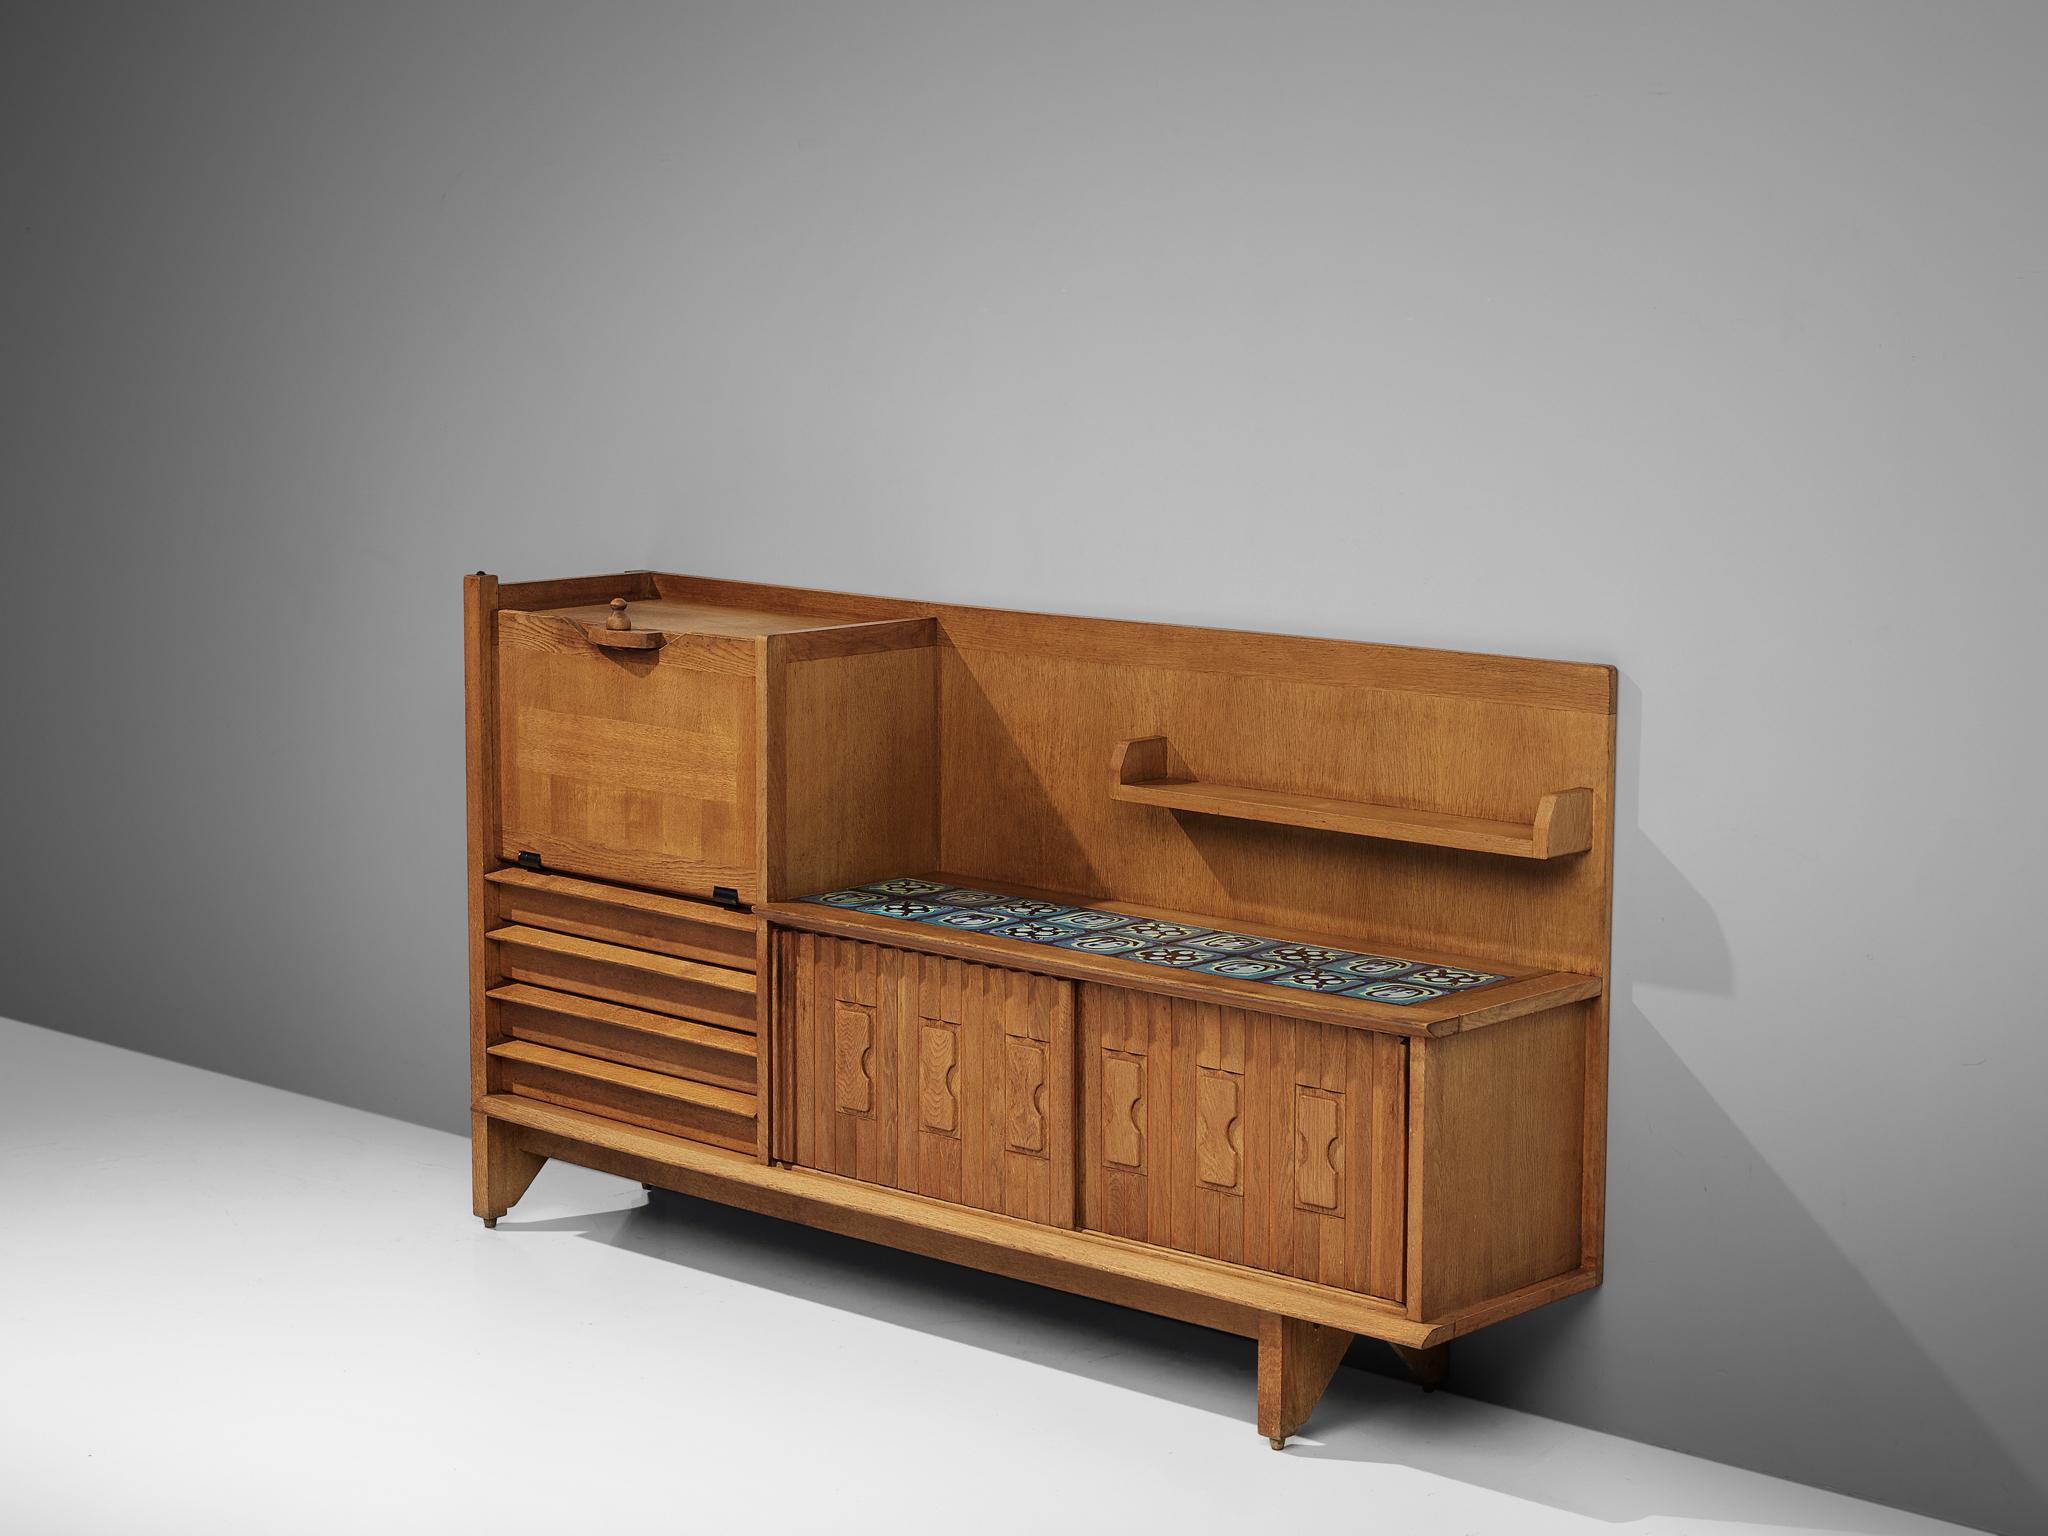 Guillerme et Chambron, buffet, oak and ceramic, France, 1960s

This characteristic cabinet in solid oak is designed by the French designer duo Jacques Chambron and Robert Guillerme. It features two sliding front doors, one pullout doors on the